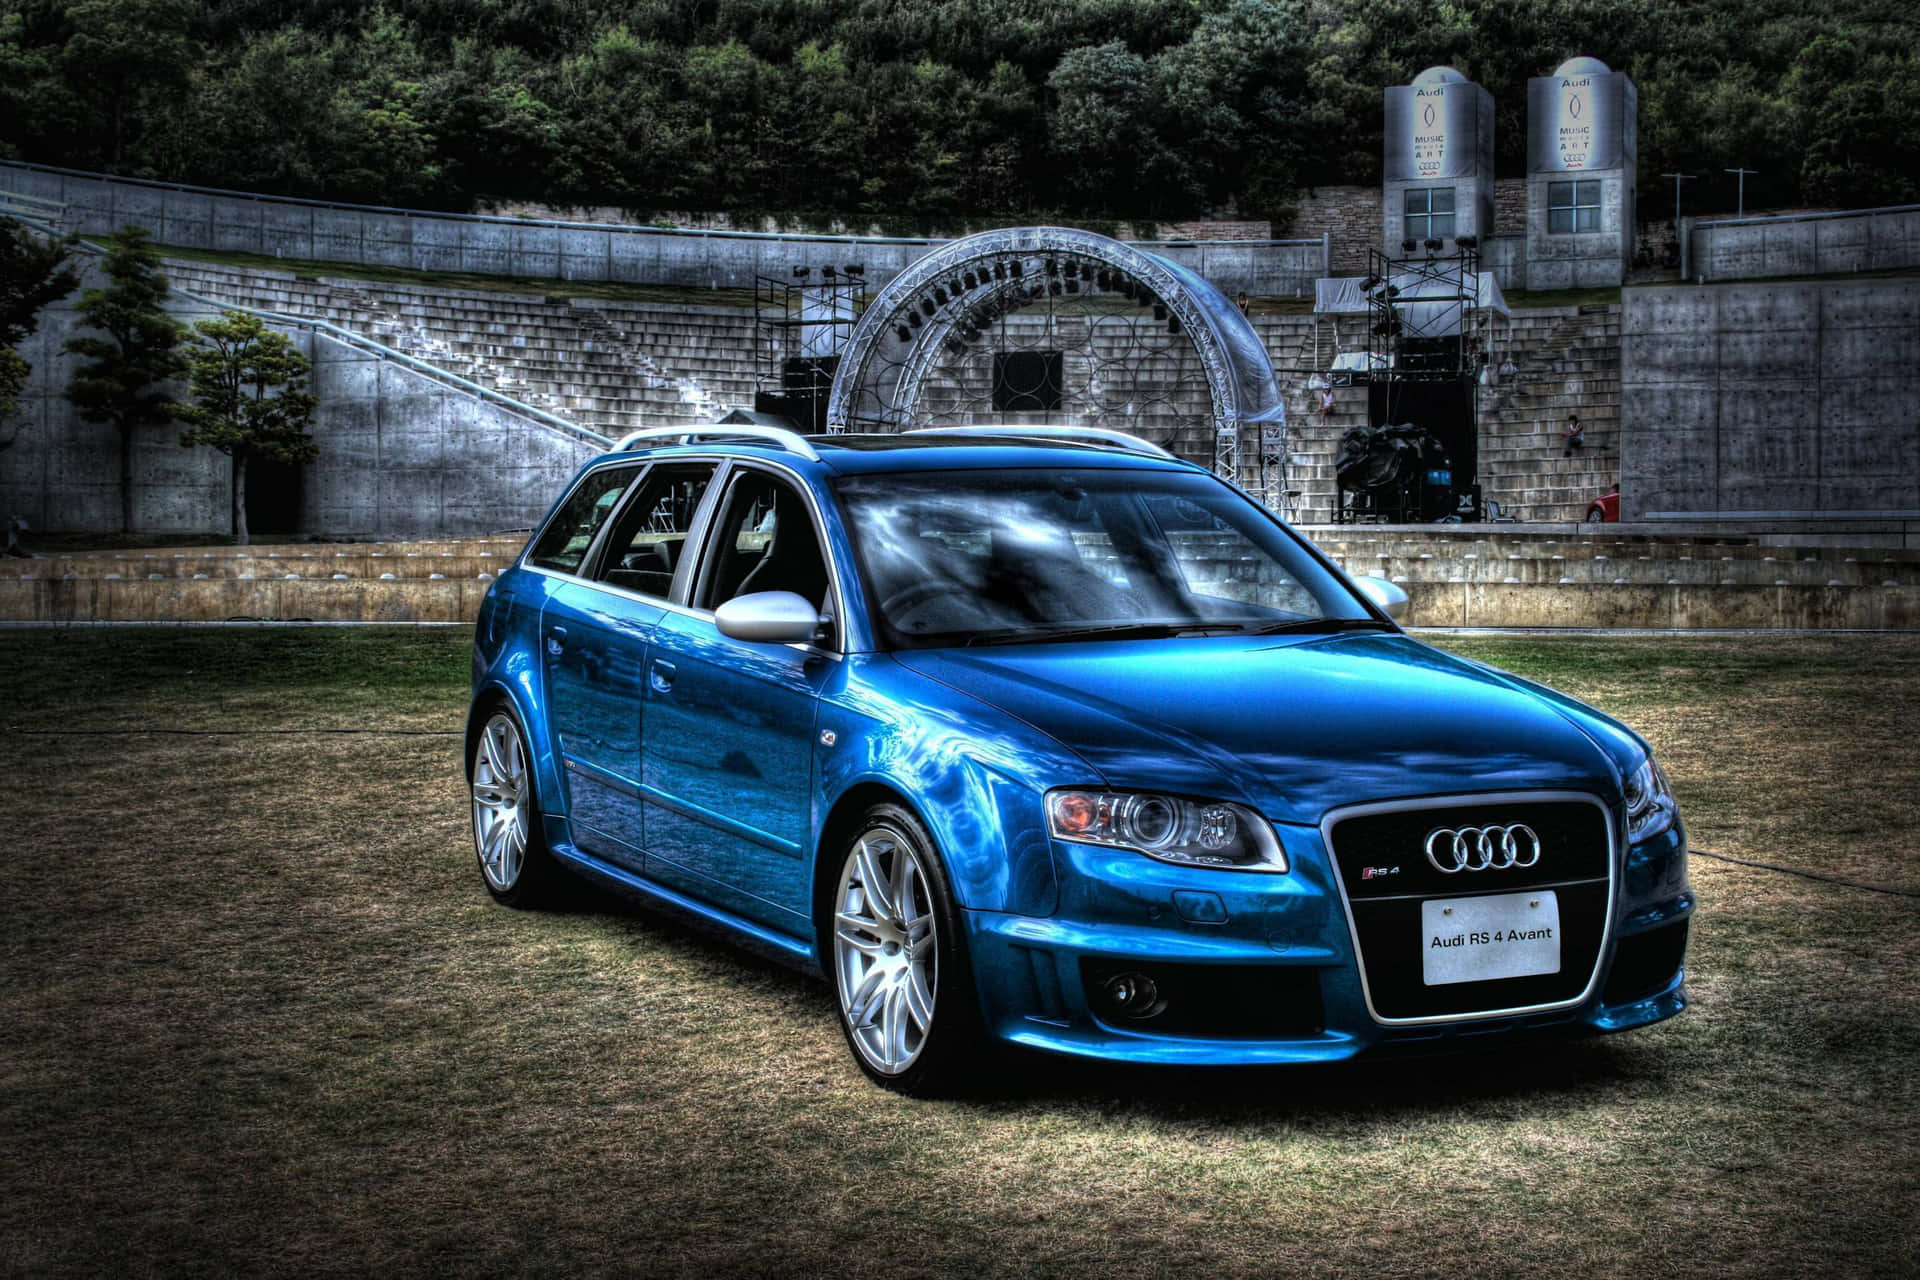 Audi RS4 B7 on the Road Wallpaper